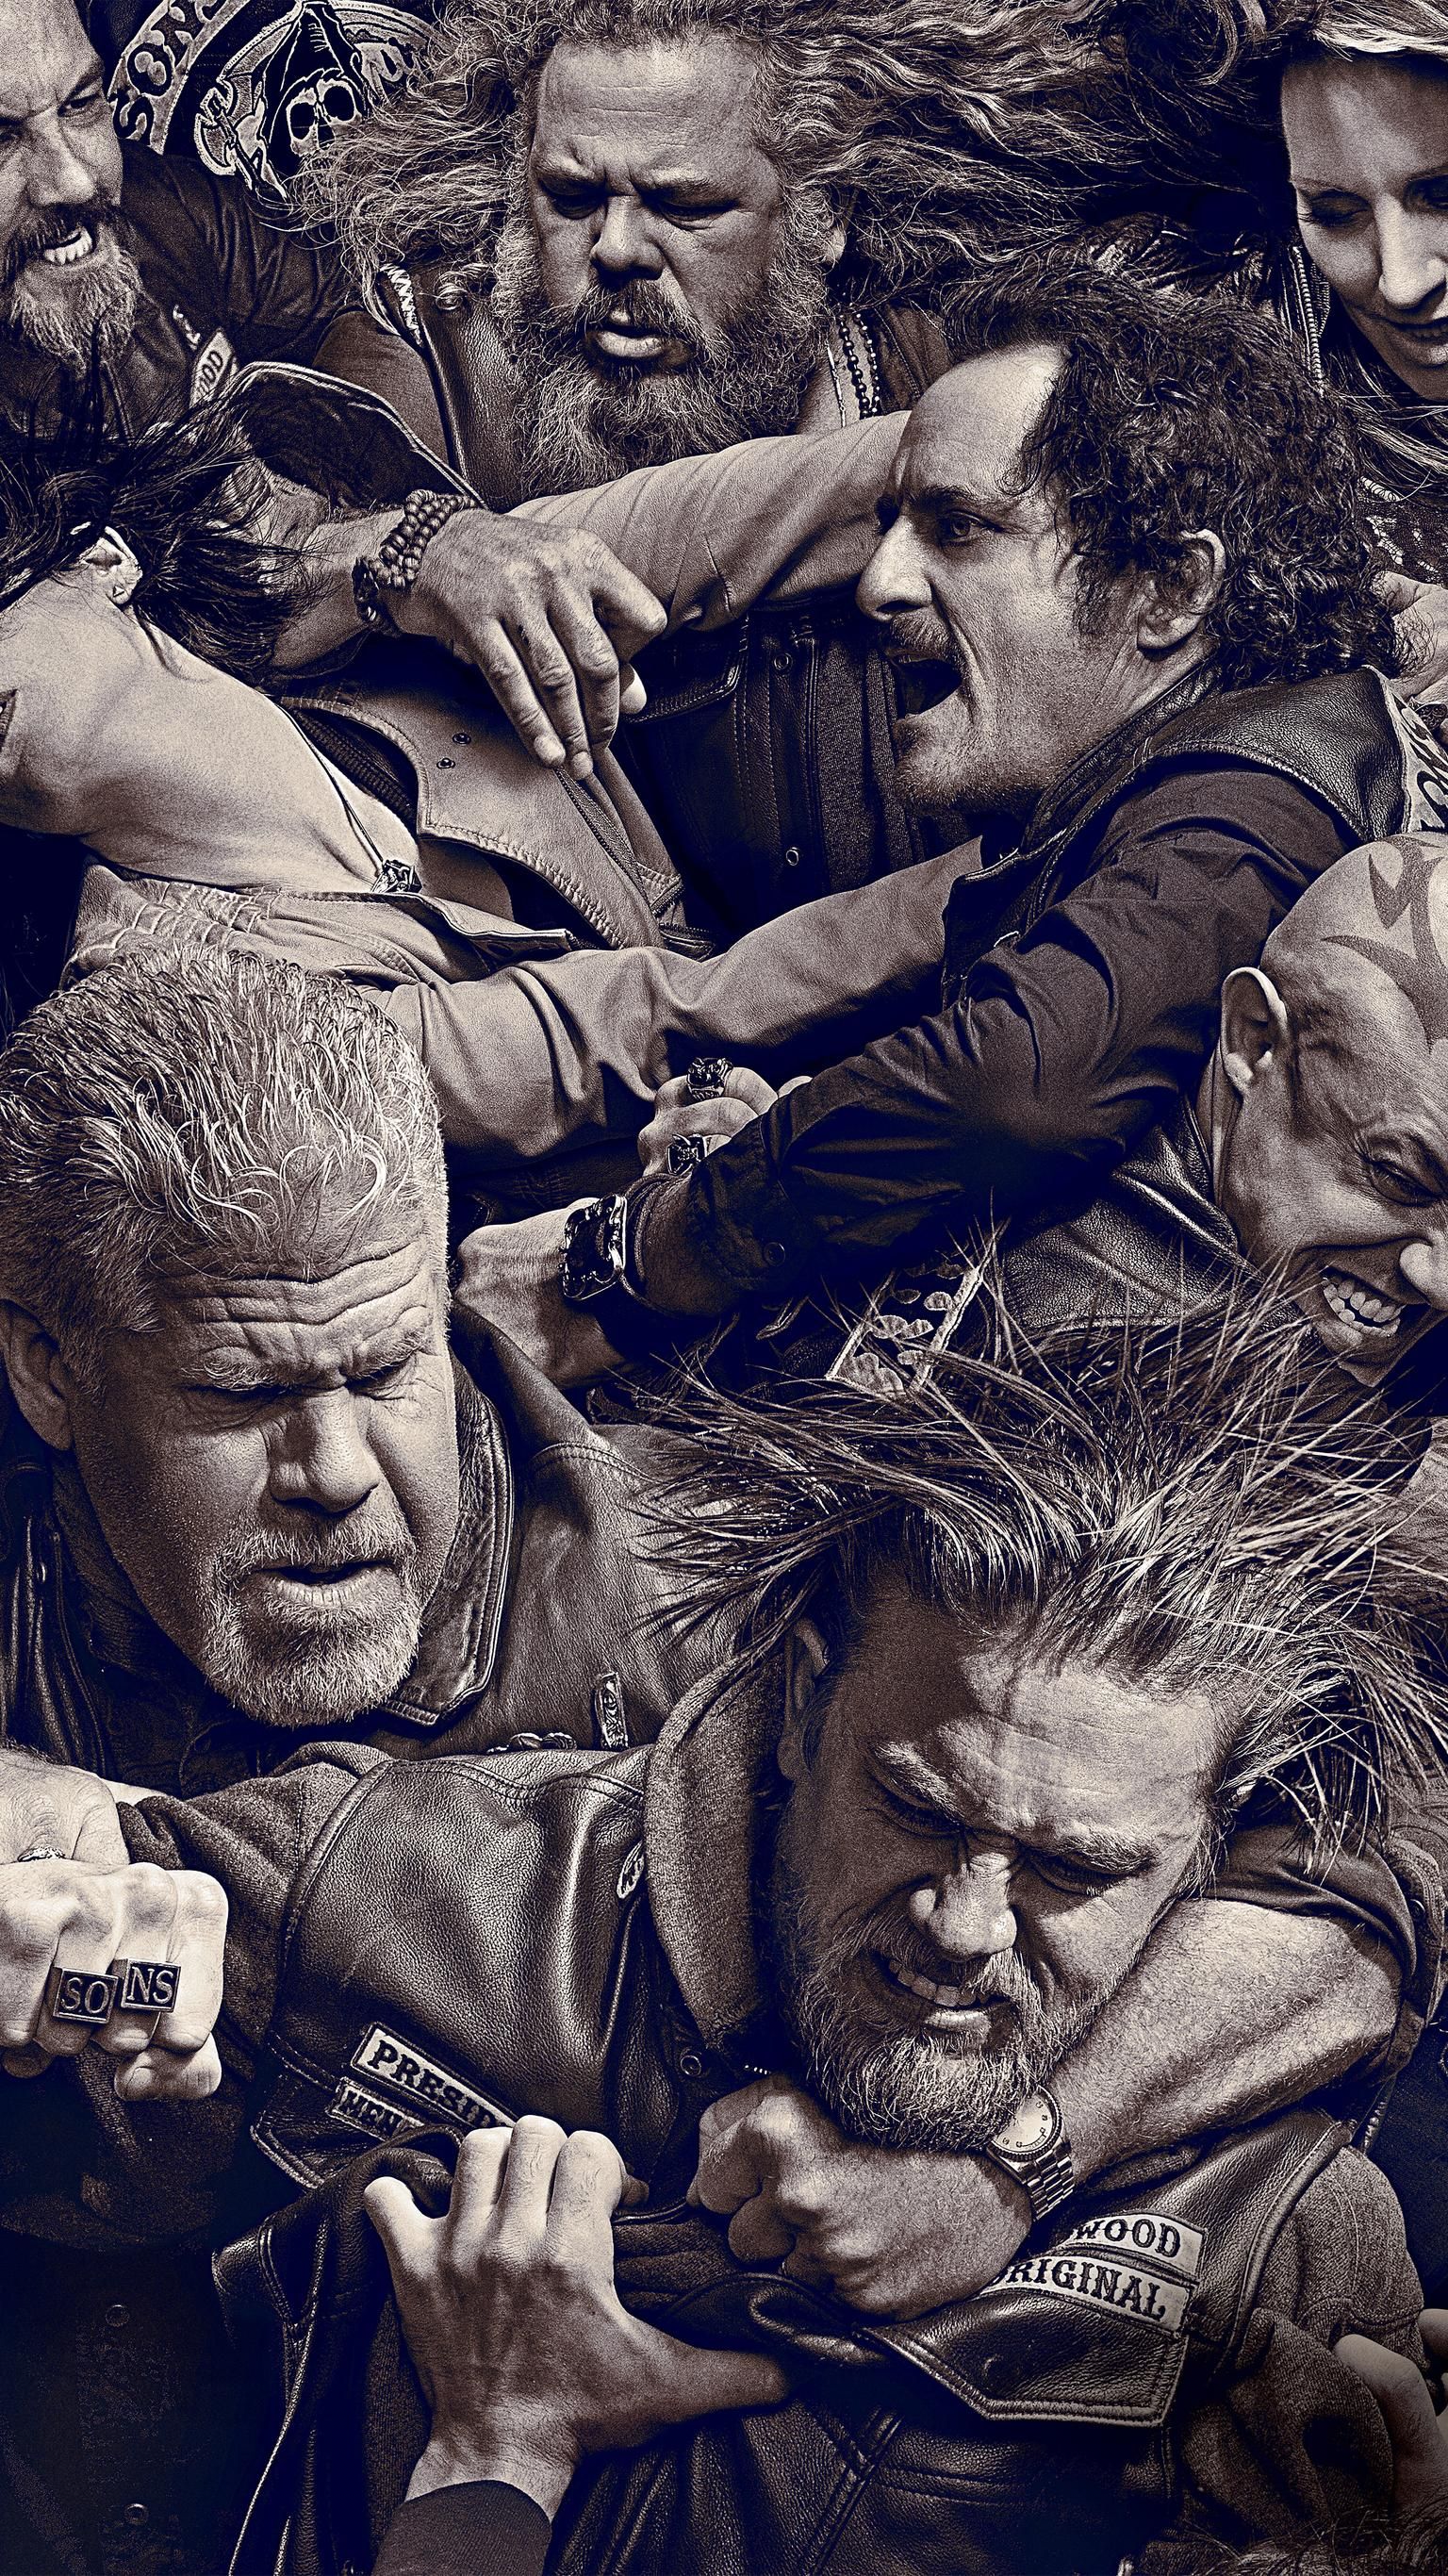 Sons Of Anarchy iPhone Wallpapers